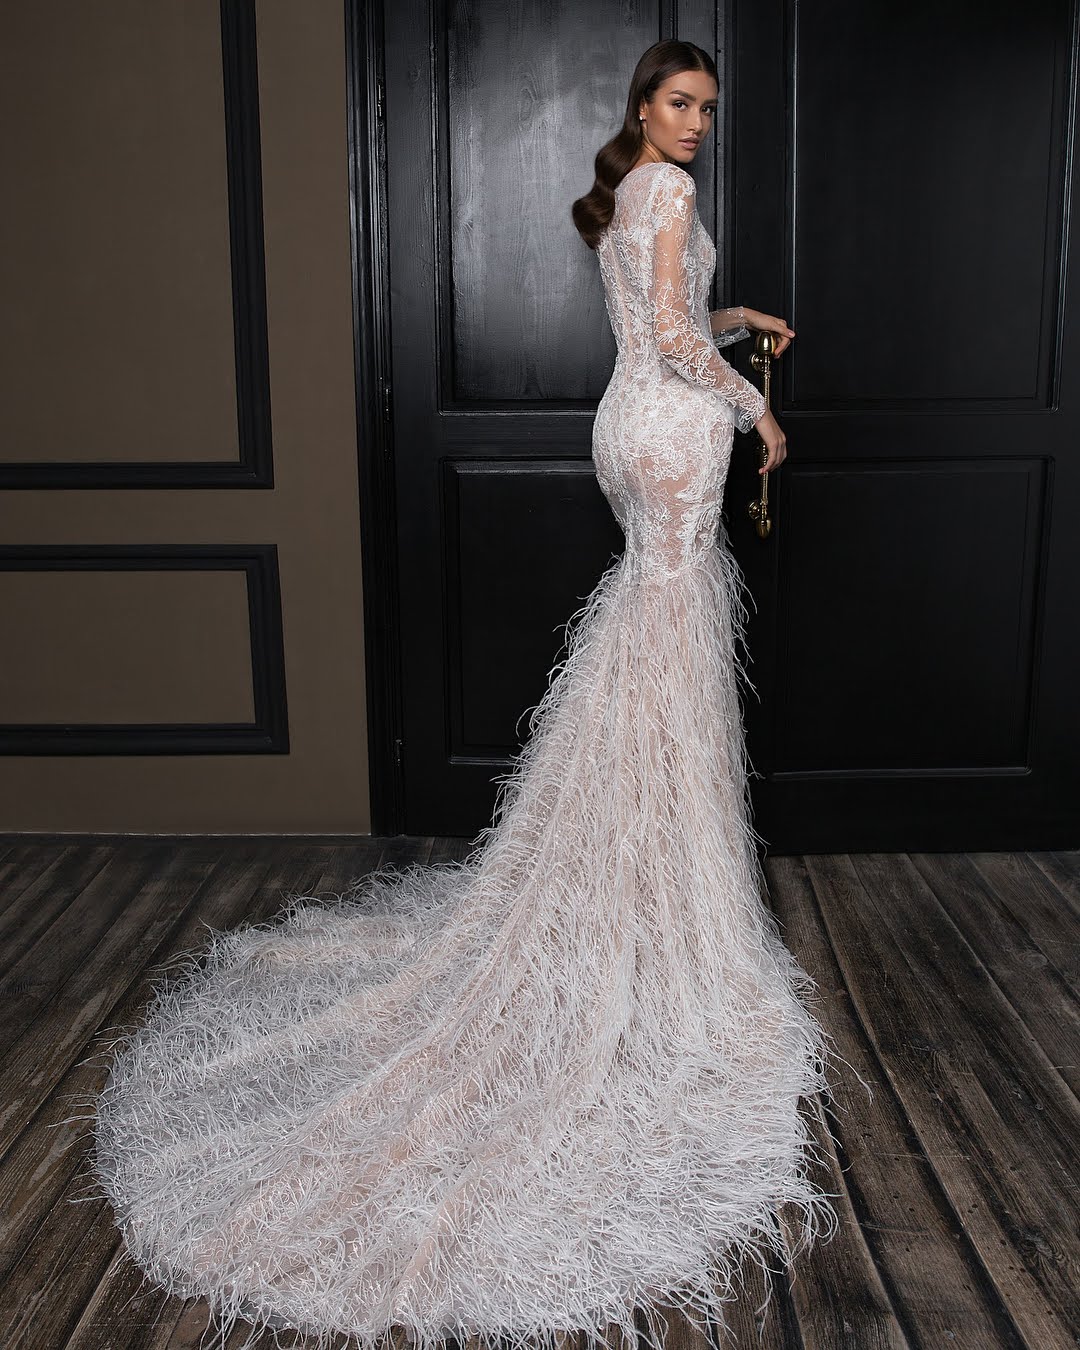 Bridal collection SS19: You dream - CRYSTAL DESIGN embodies